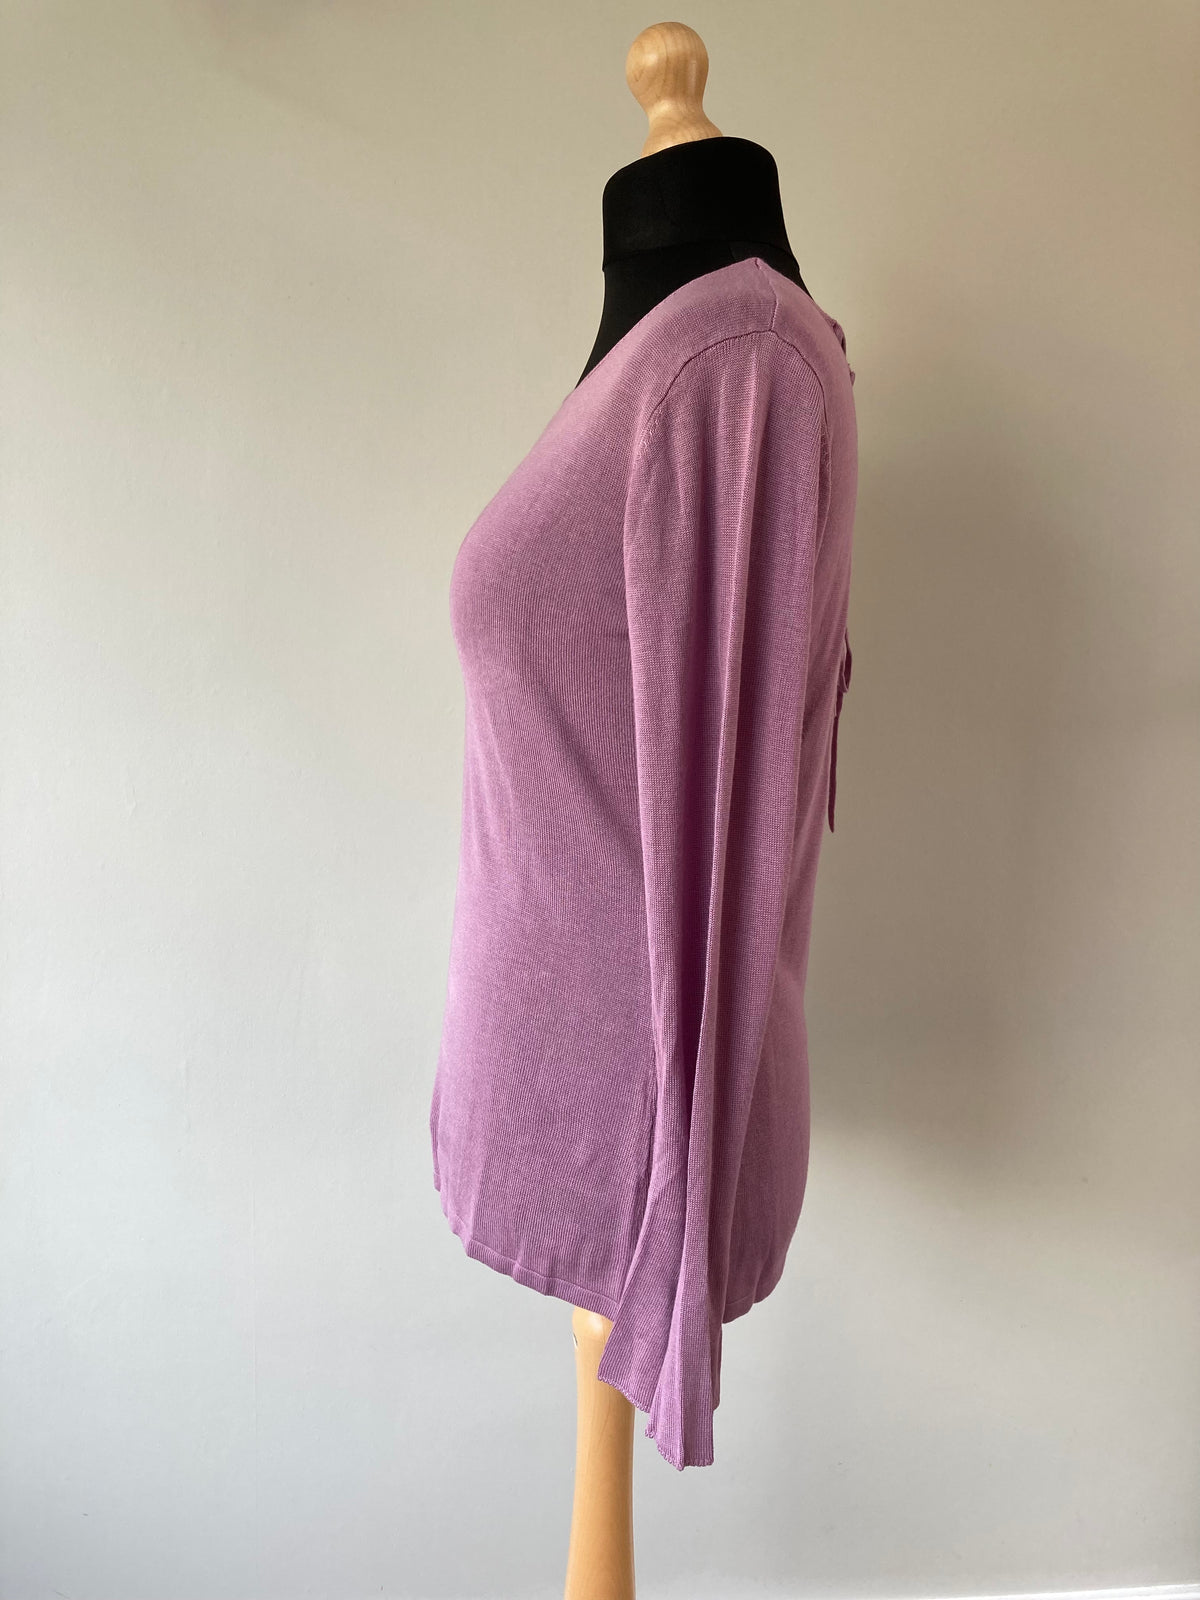 Lilac long sleeve top by LASCANA size 14/16